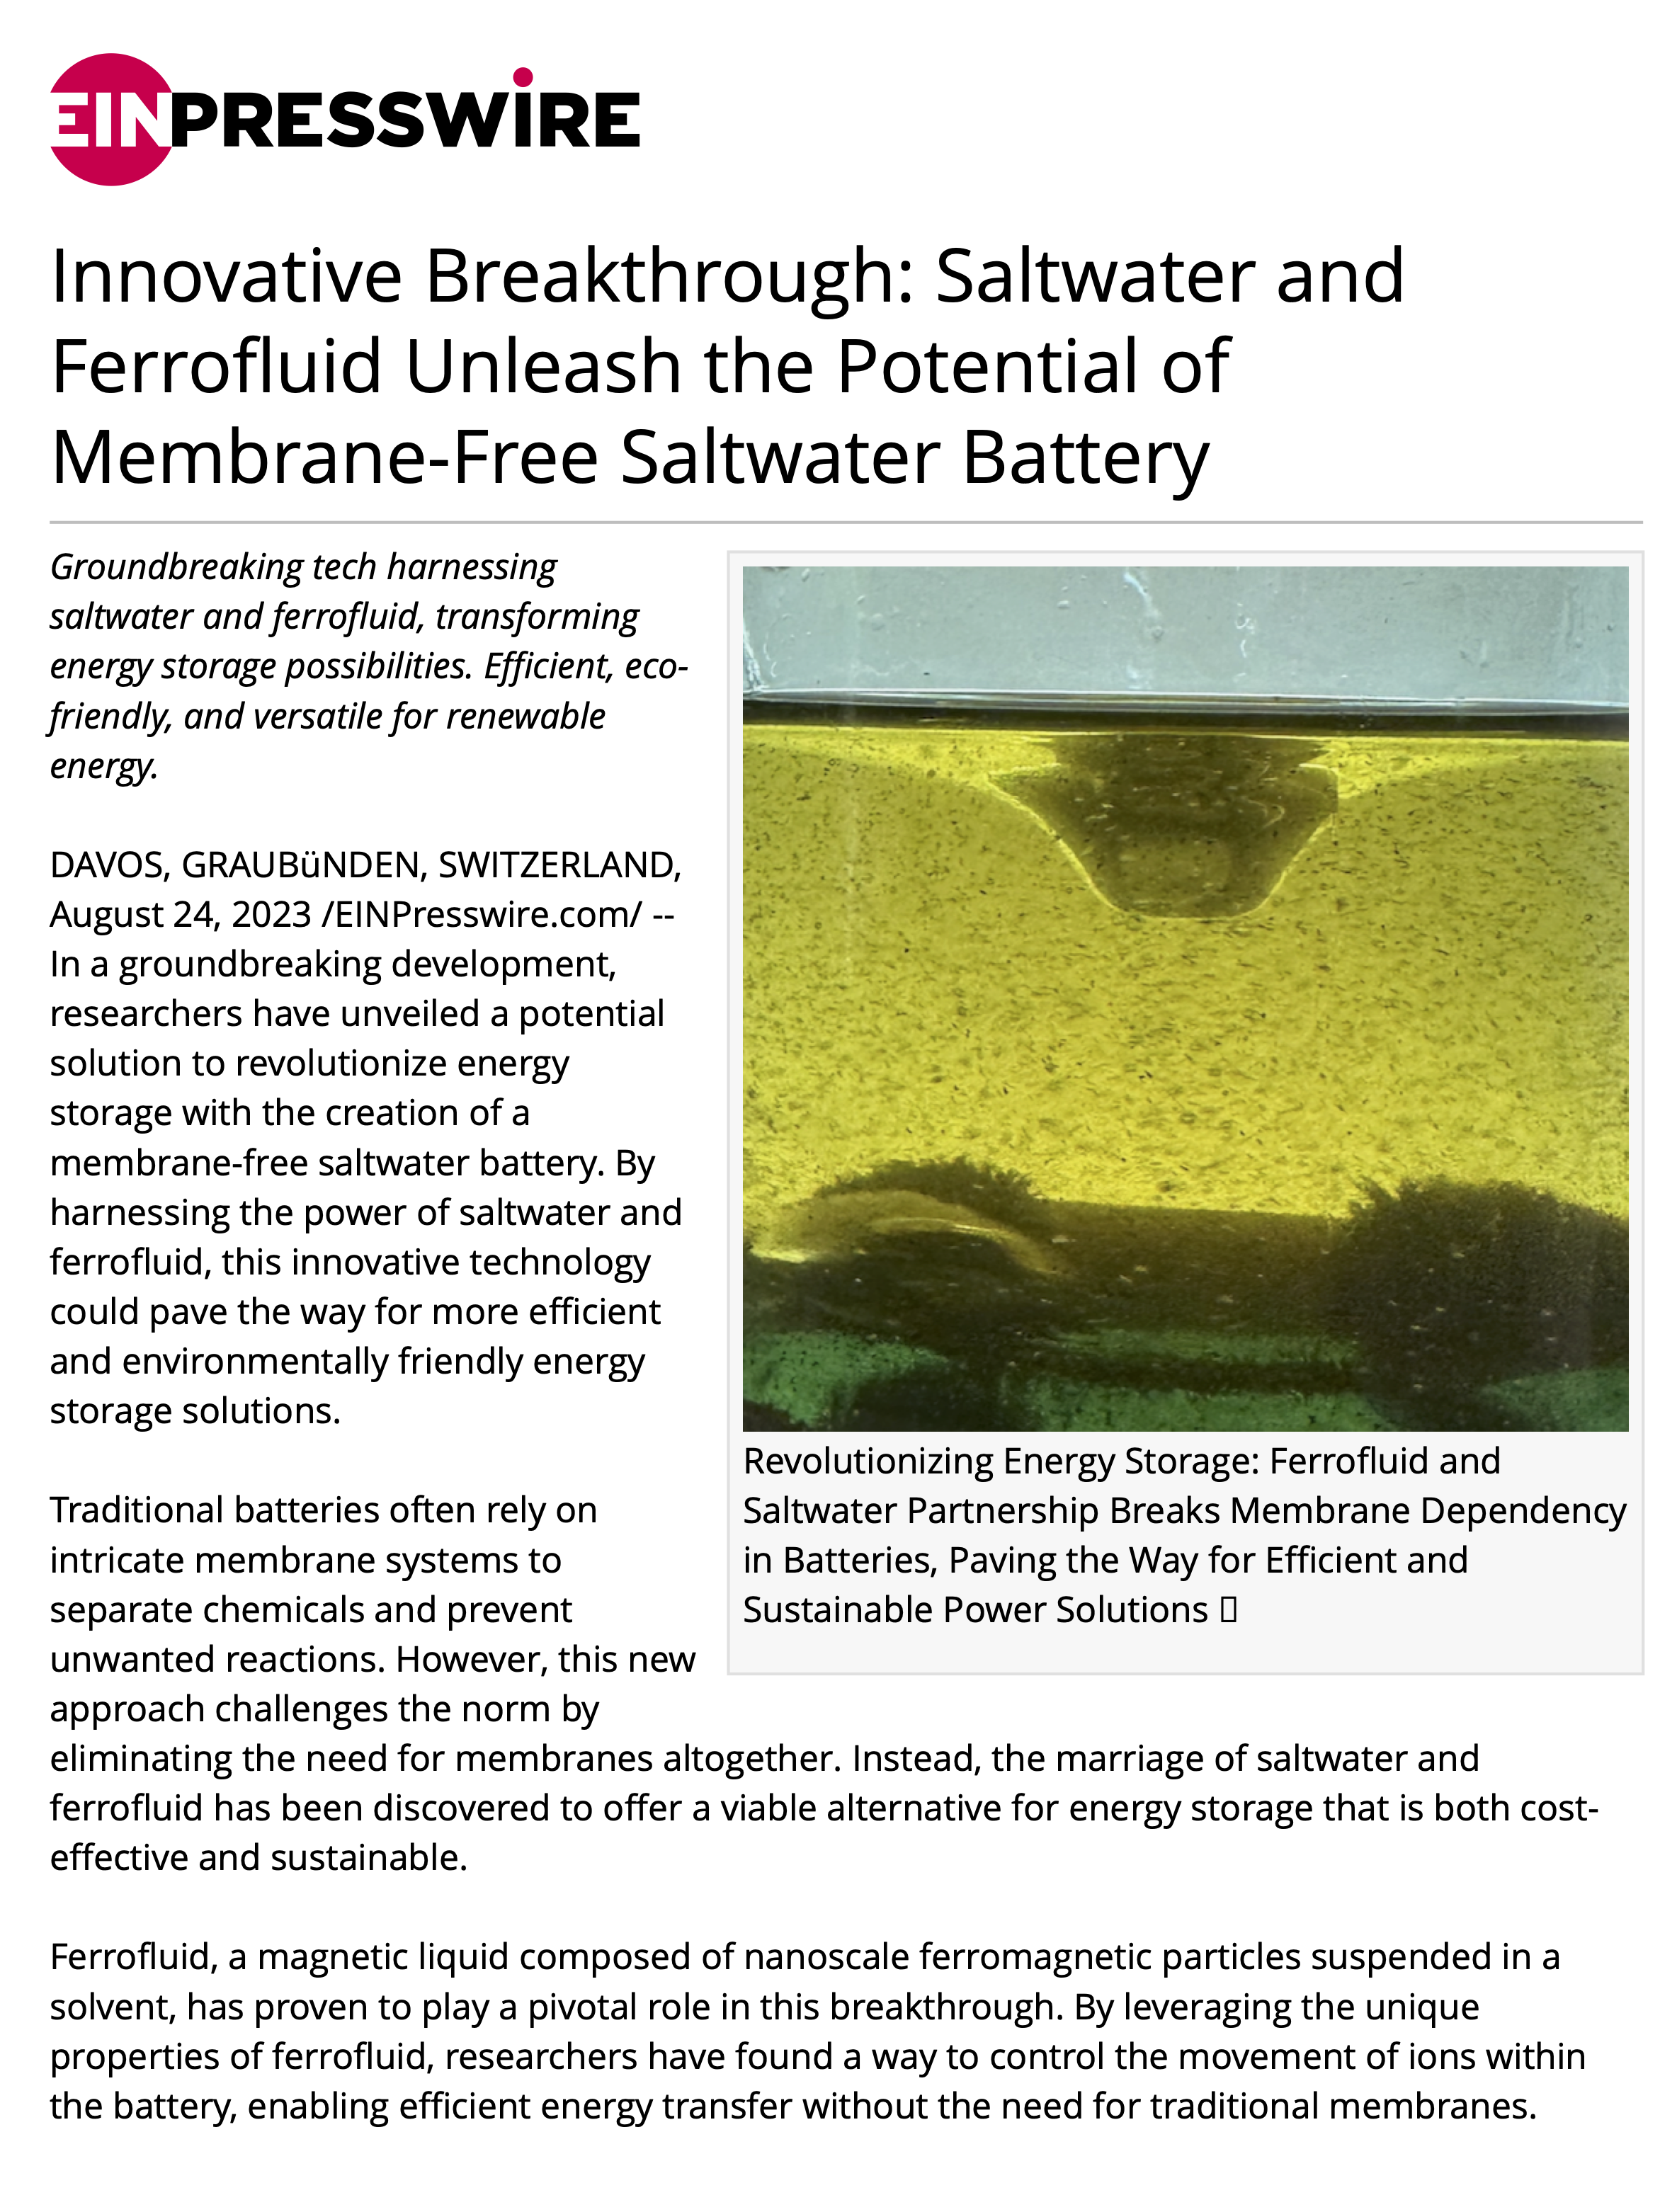 Innovative Breakthrough: Saltwater and Ferrofluid Unleash the Potential of Membrane-Free Saltwater Battery